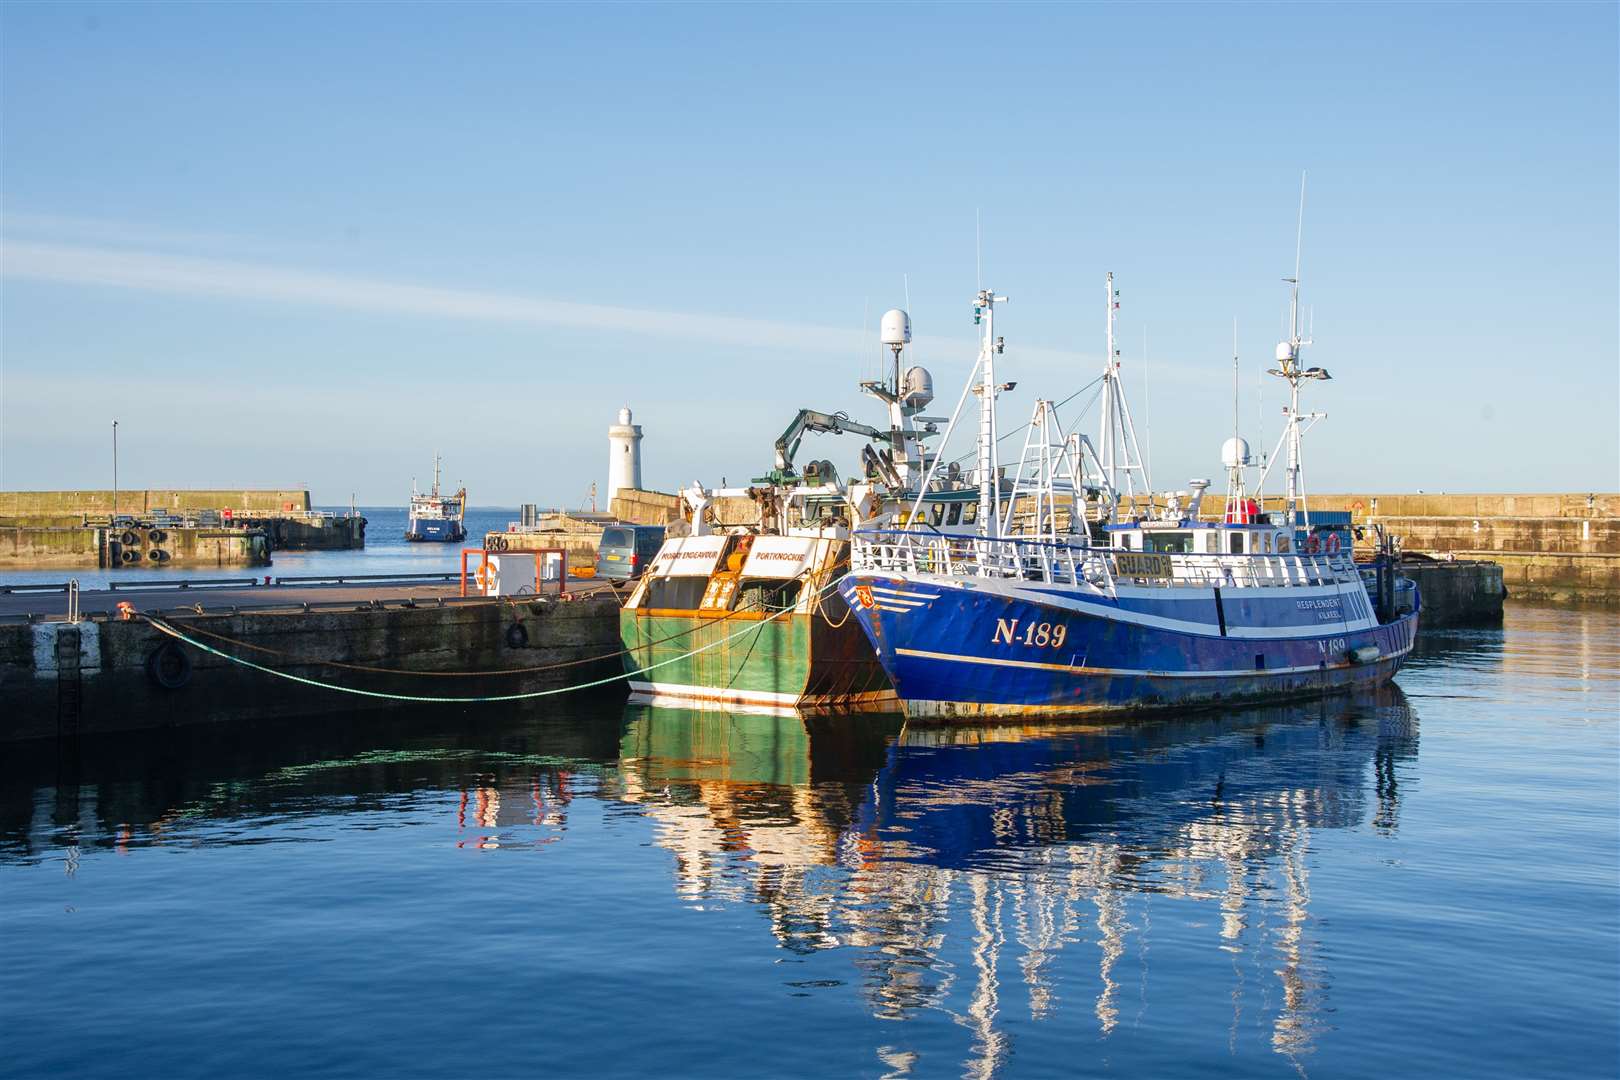 Nearly 400 boxes of fish were landed at Buckie Harbour last week.